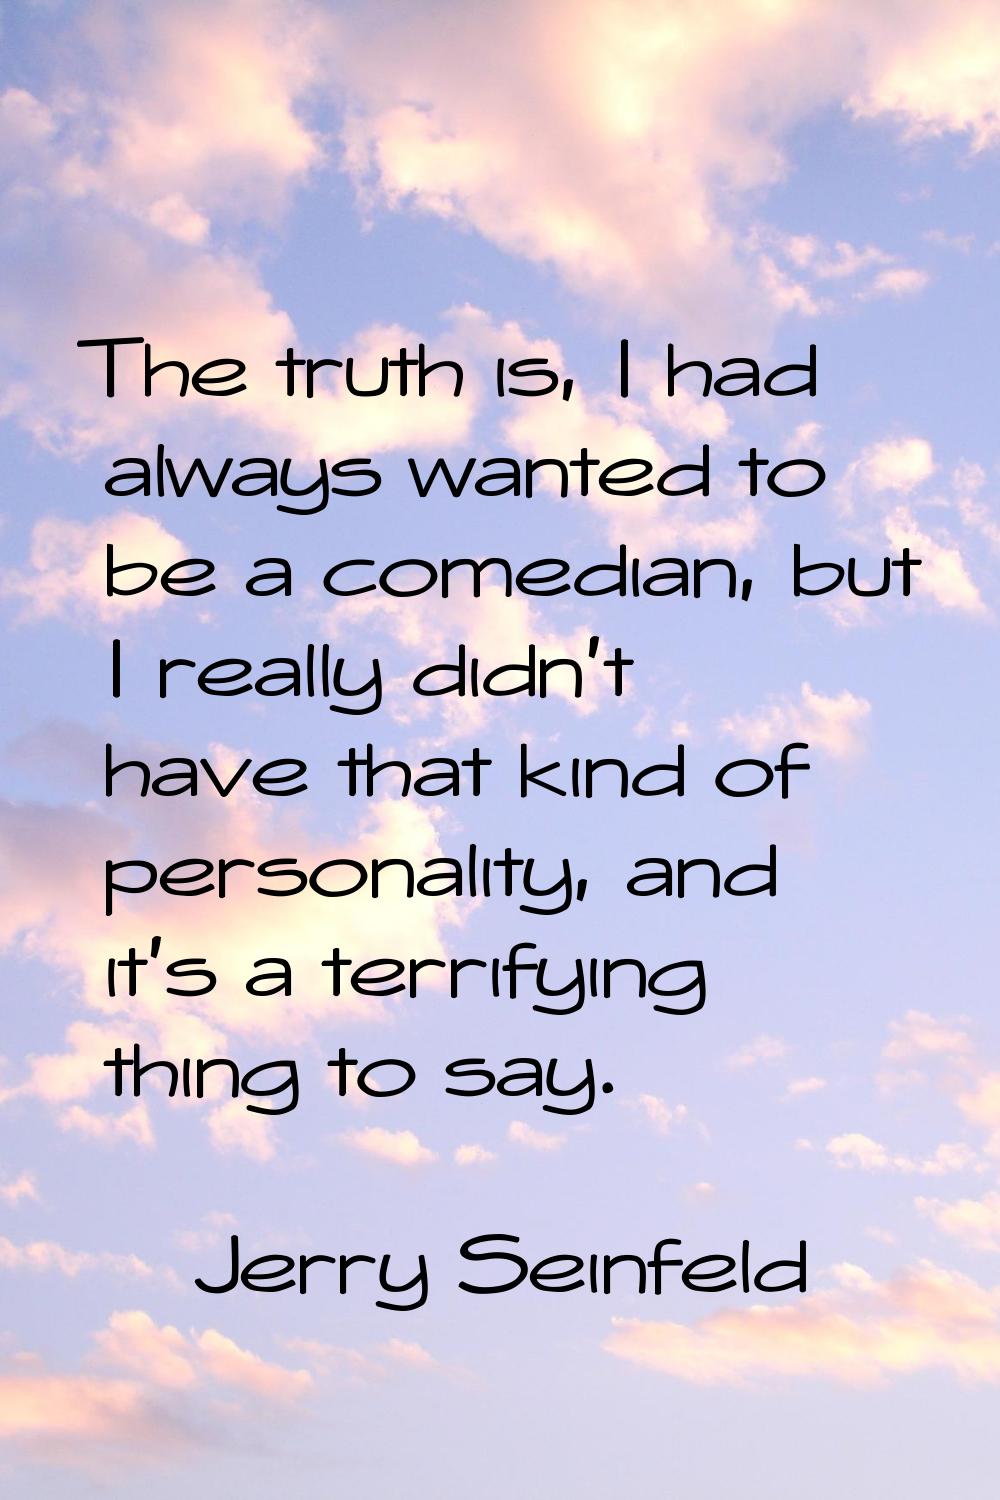 The truth is, I had always wanted to be a comedian, but I really didn't have that kind of personali